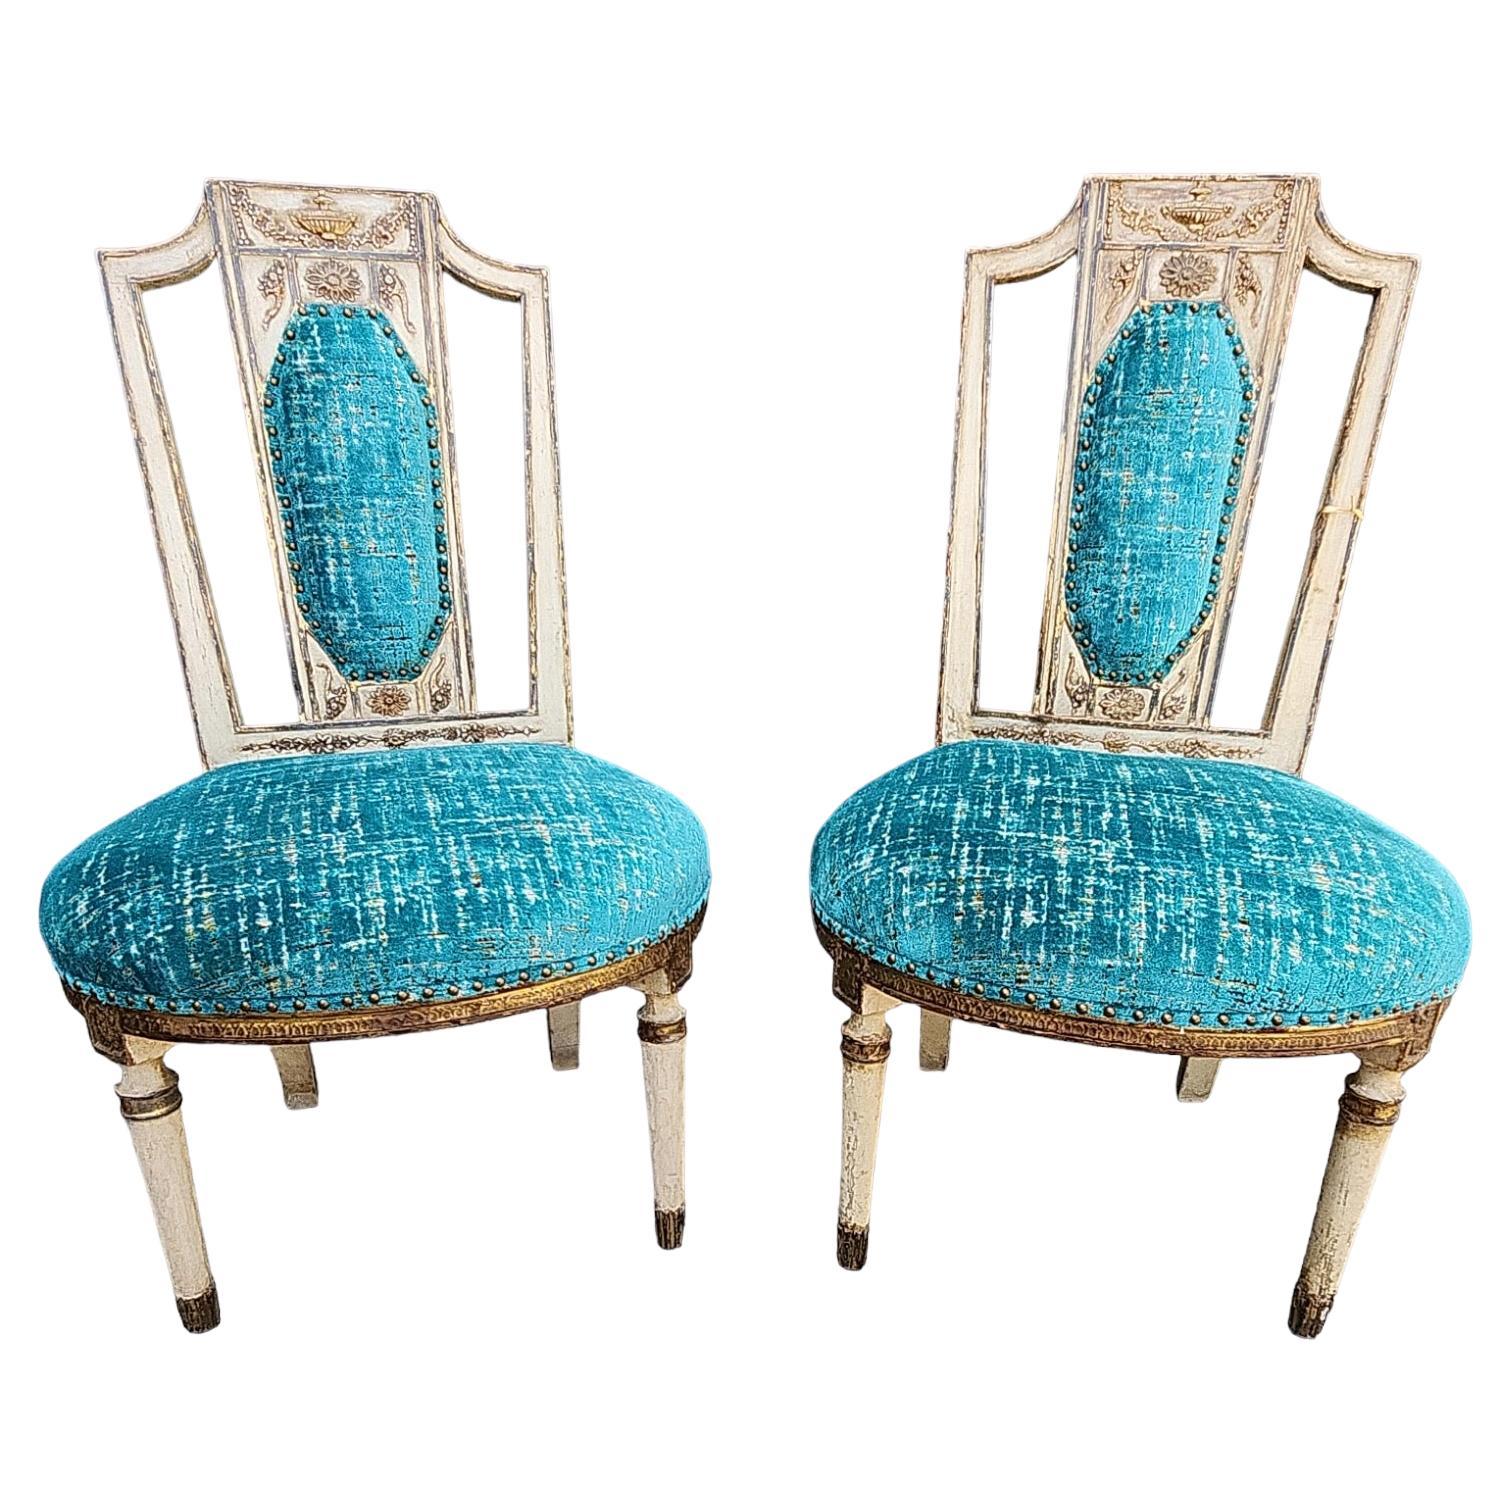 Pair of 19th Century Italian Carved and Painted Side Chairs